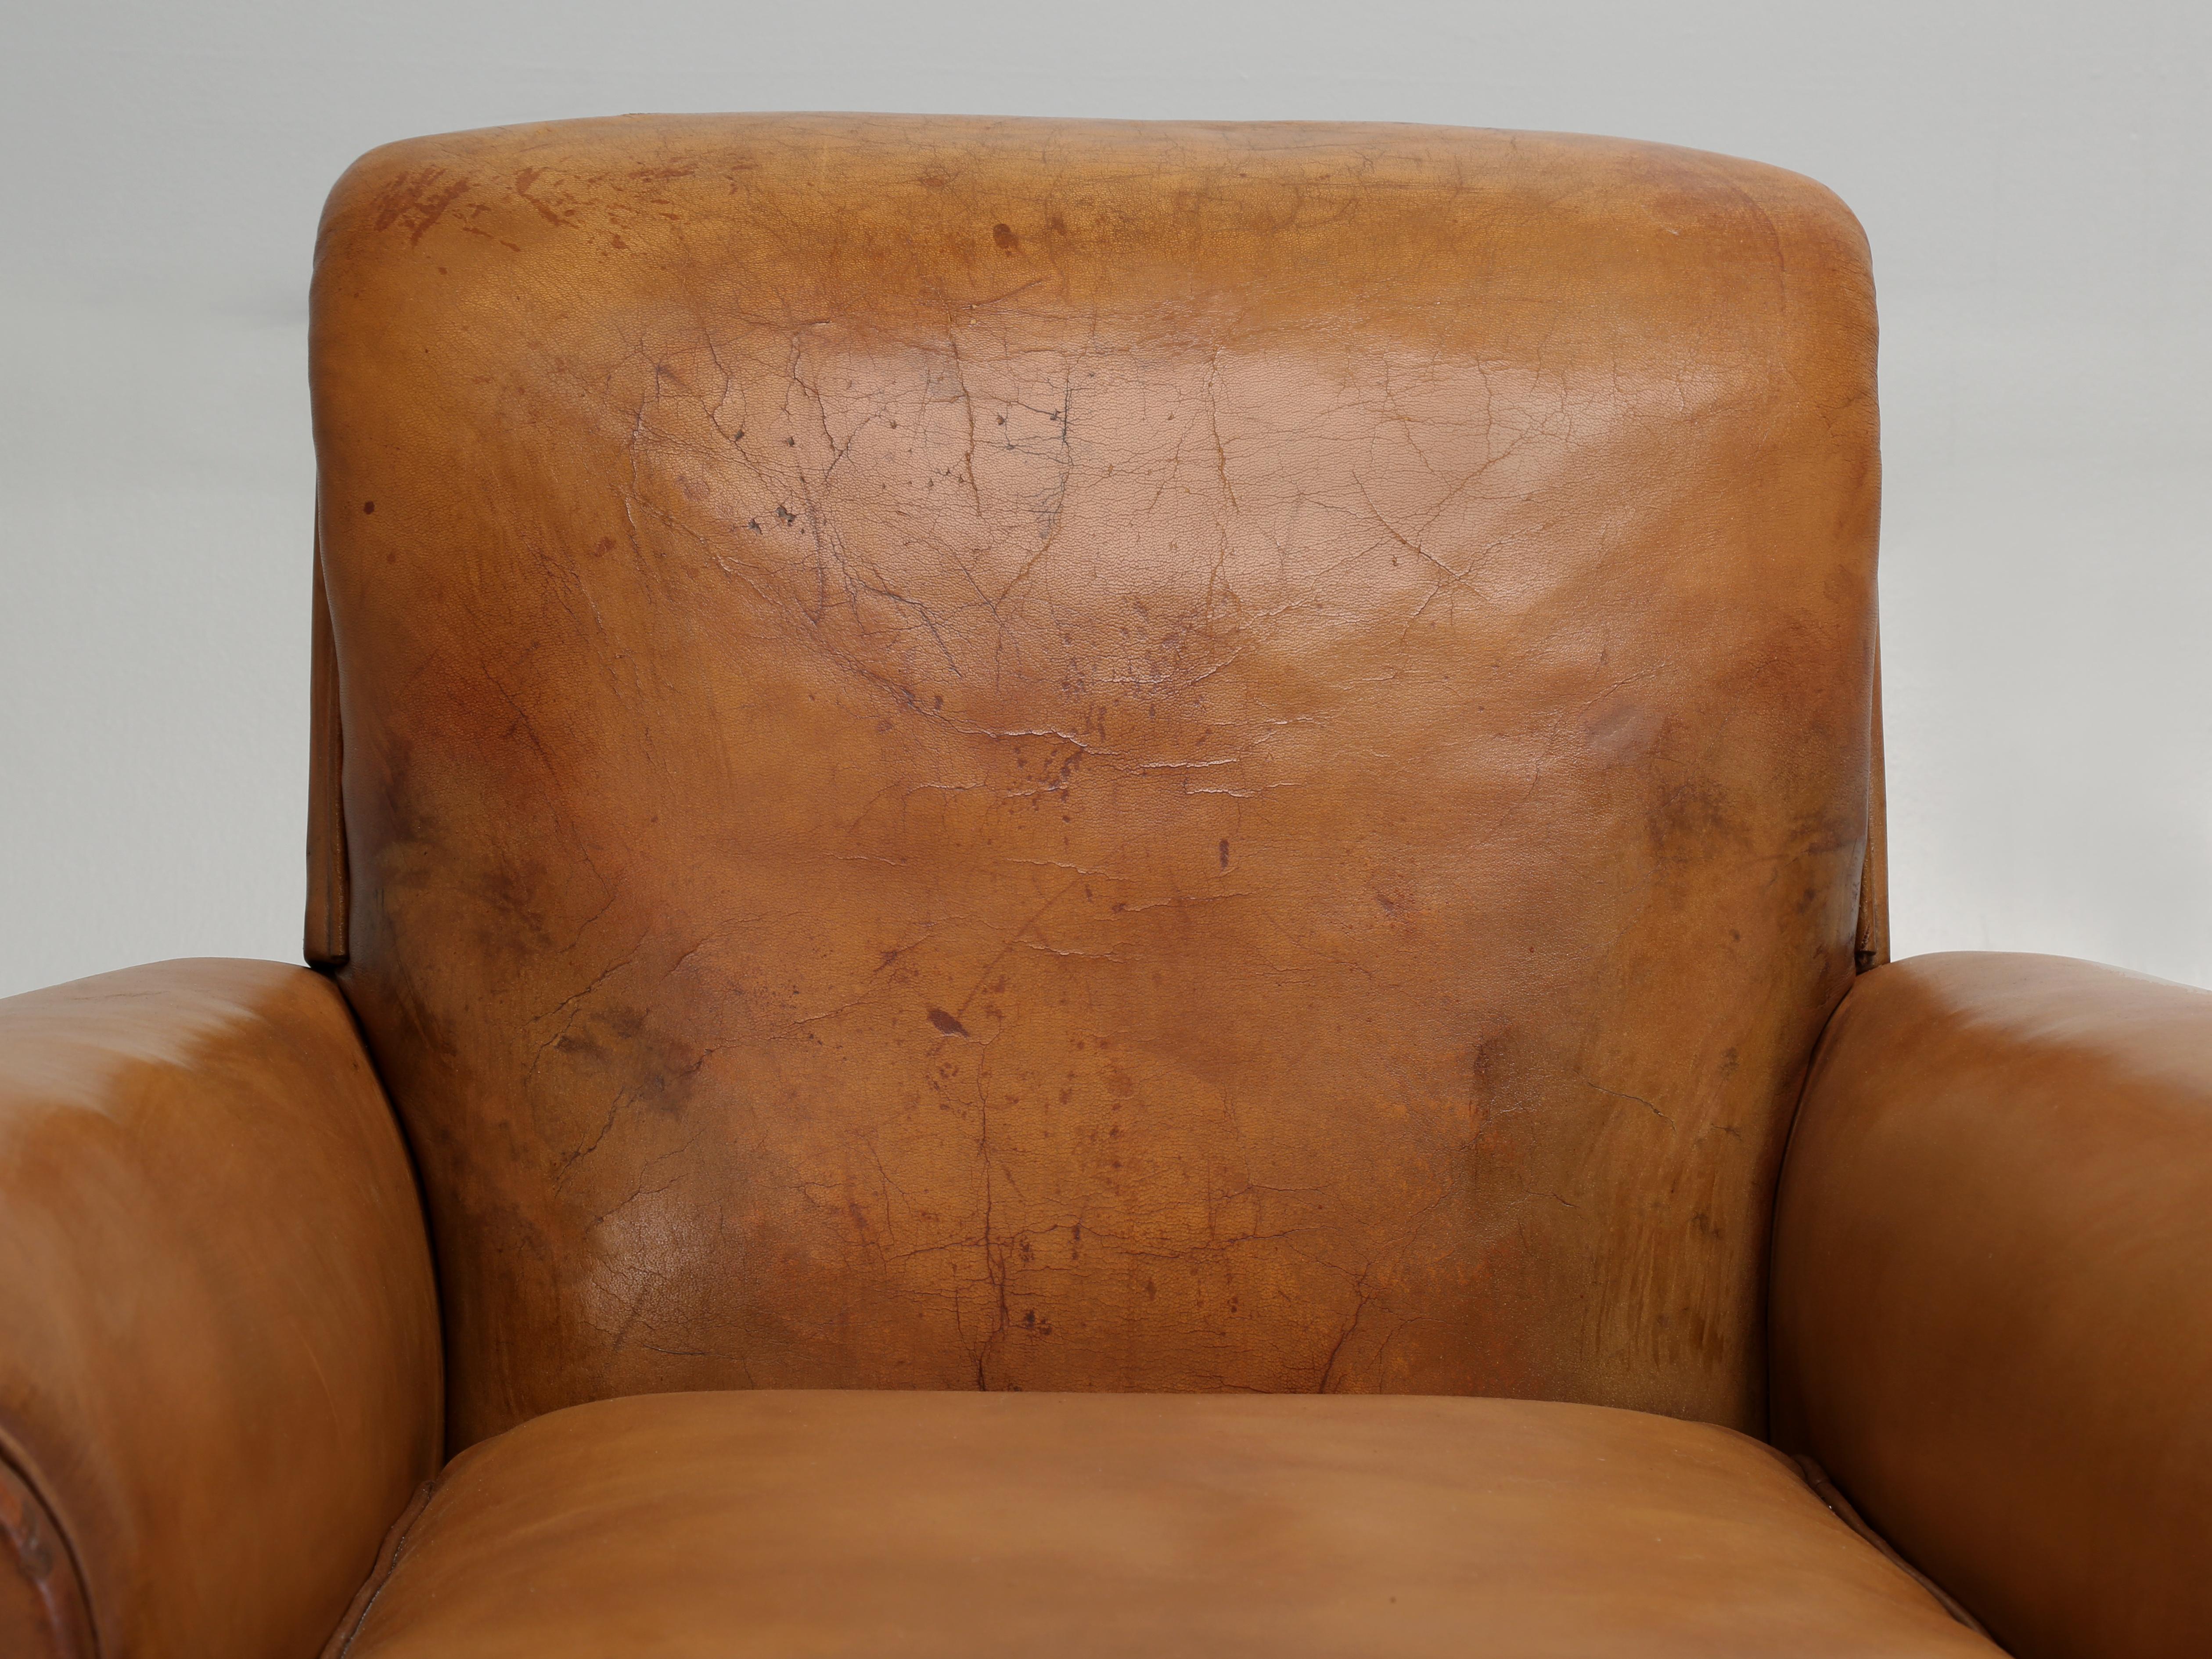 French Leather Club Chairs that have been completely restored by our inhouse Old Plank Upholstery Department. We have been importing French Leather Club Chairs for over 30-years and have become quite proficient at restoring the Club Chairs to a very